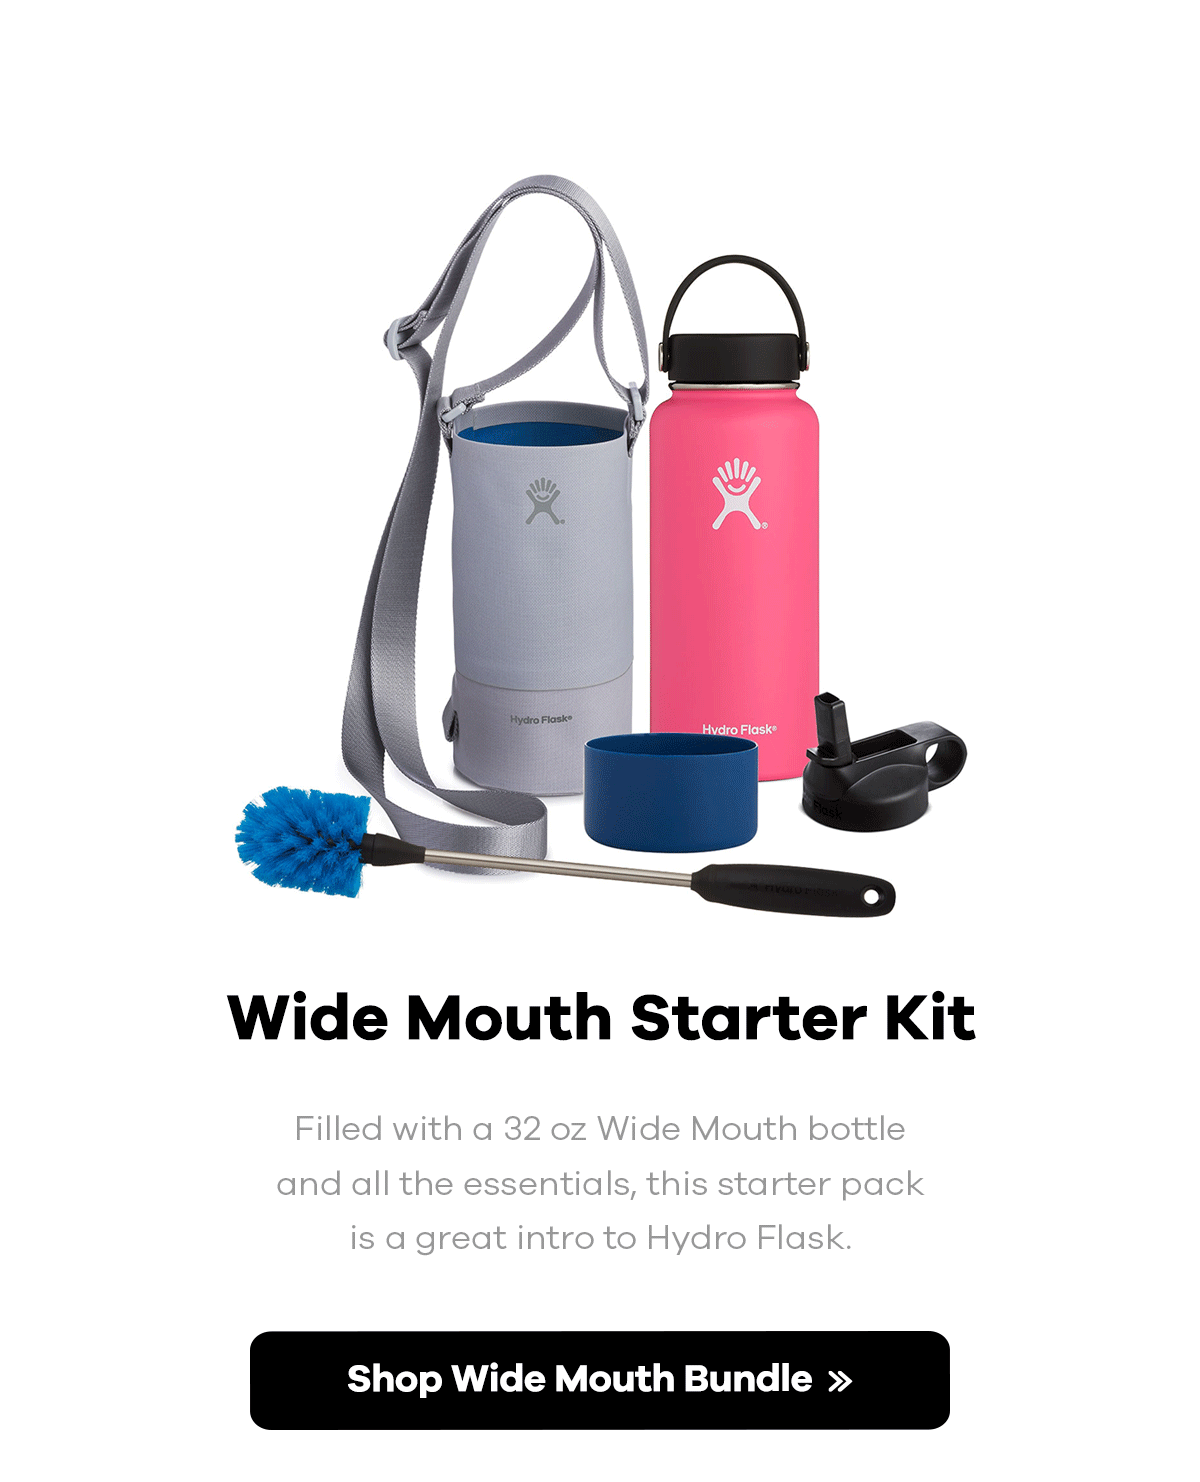 Wide Mouth Starter Kit | Filled with a 32 oz Wide Mouth bottle and all the essentials, this starter pack is a great intro to Hydro Flask. | Shop Wide Mouth Bundle >>